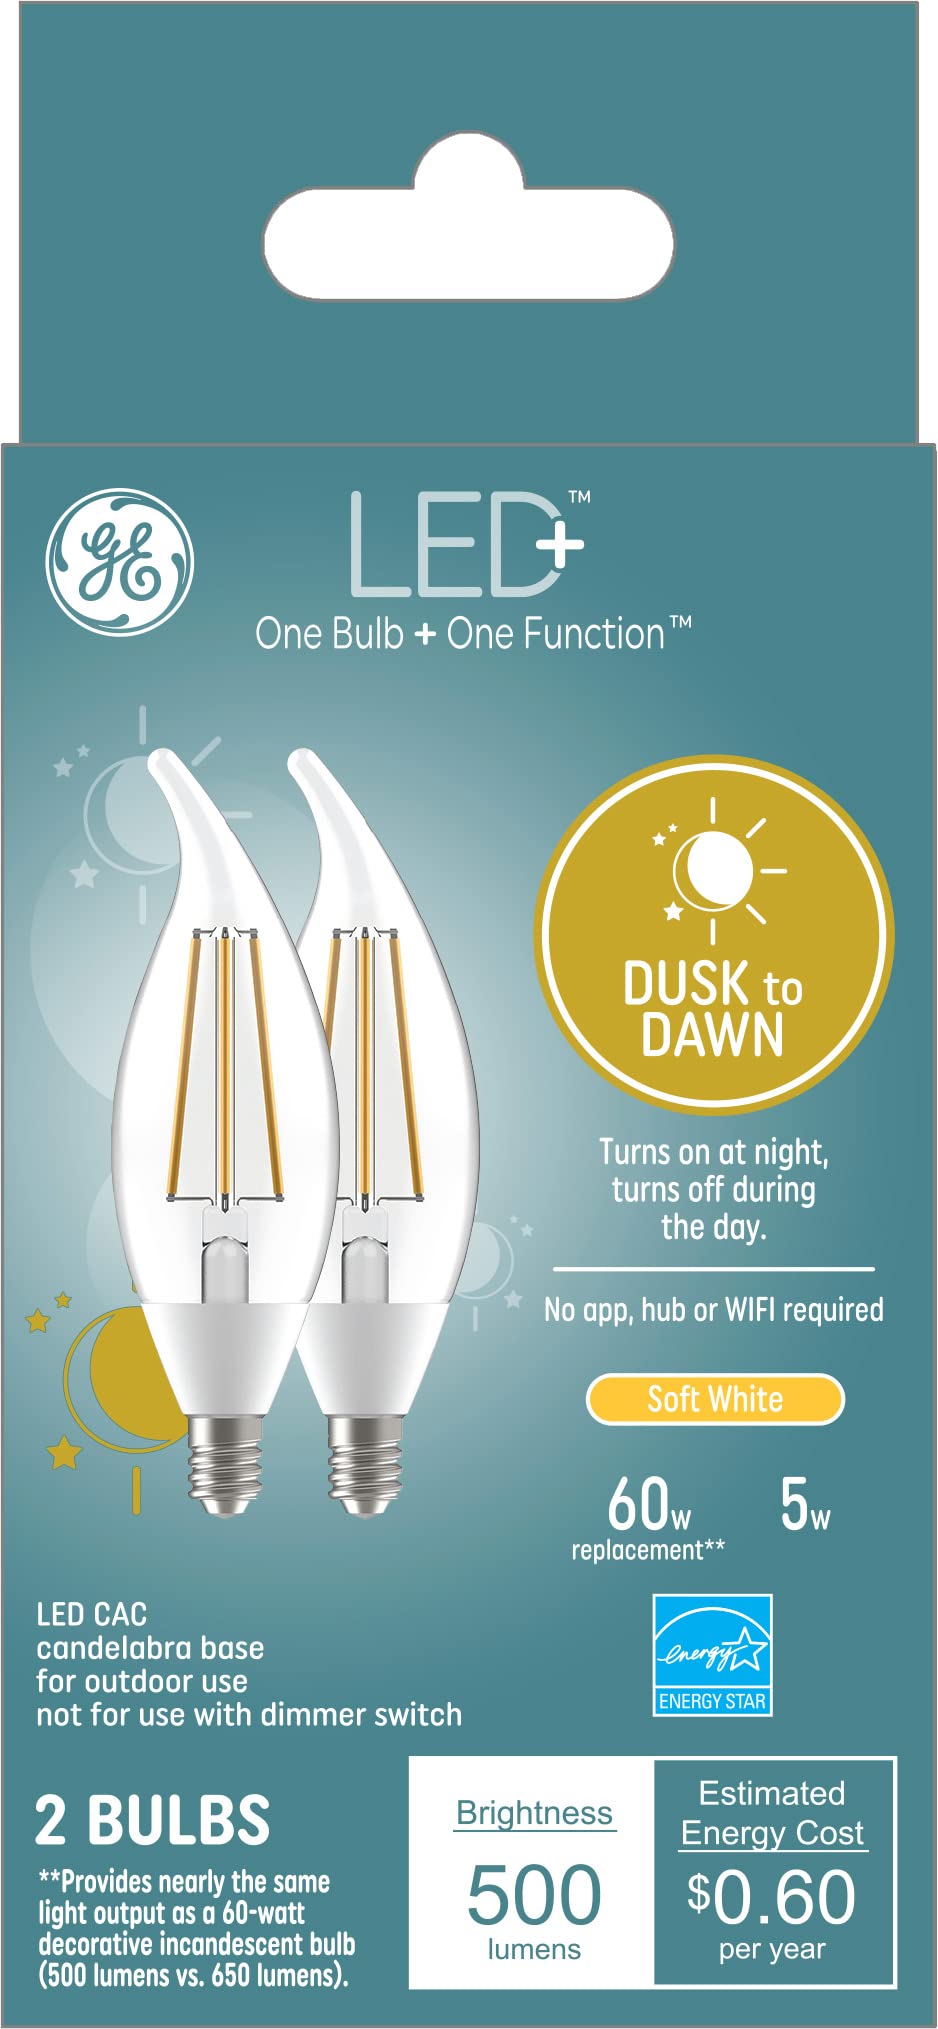 GE Lighting LED+ Dusk to Dawn LED Light Bulbs with Sunlight Sensors, Automatic On/Off Light Sensing Bulbs, Outdoor Decorative Bulbs, Soft White, Small Base(Pack of 2)